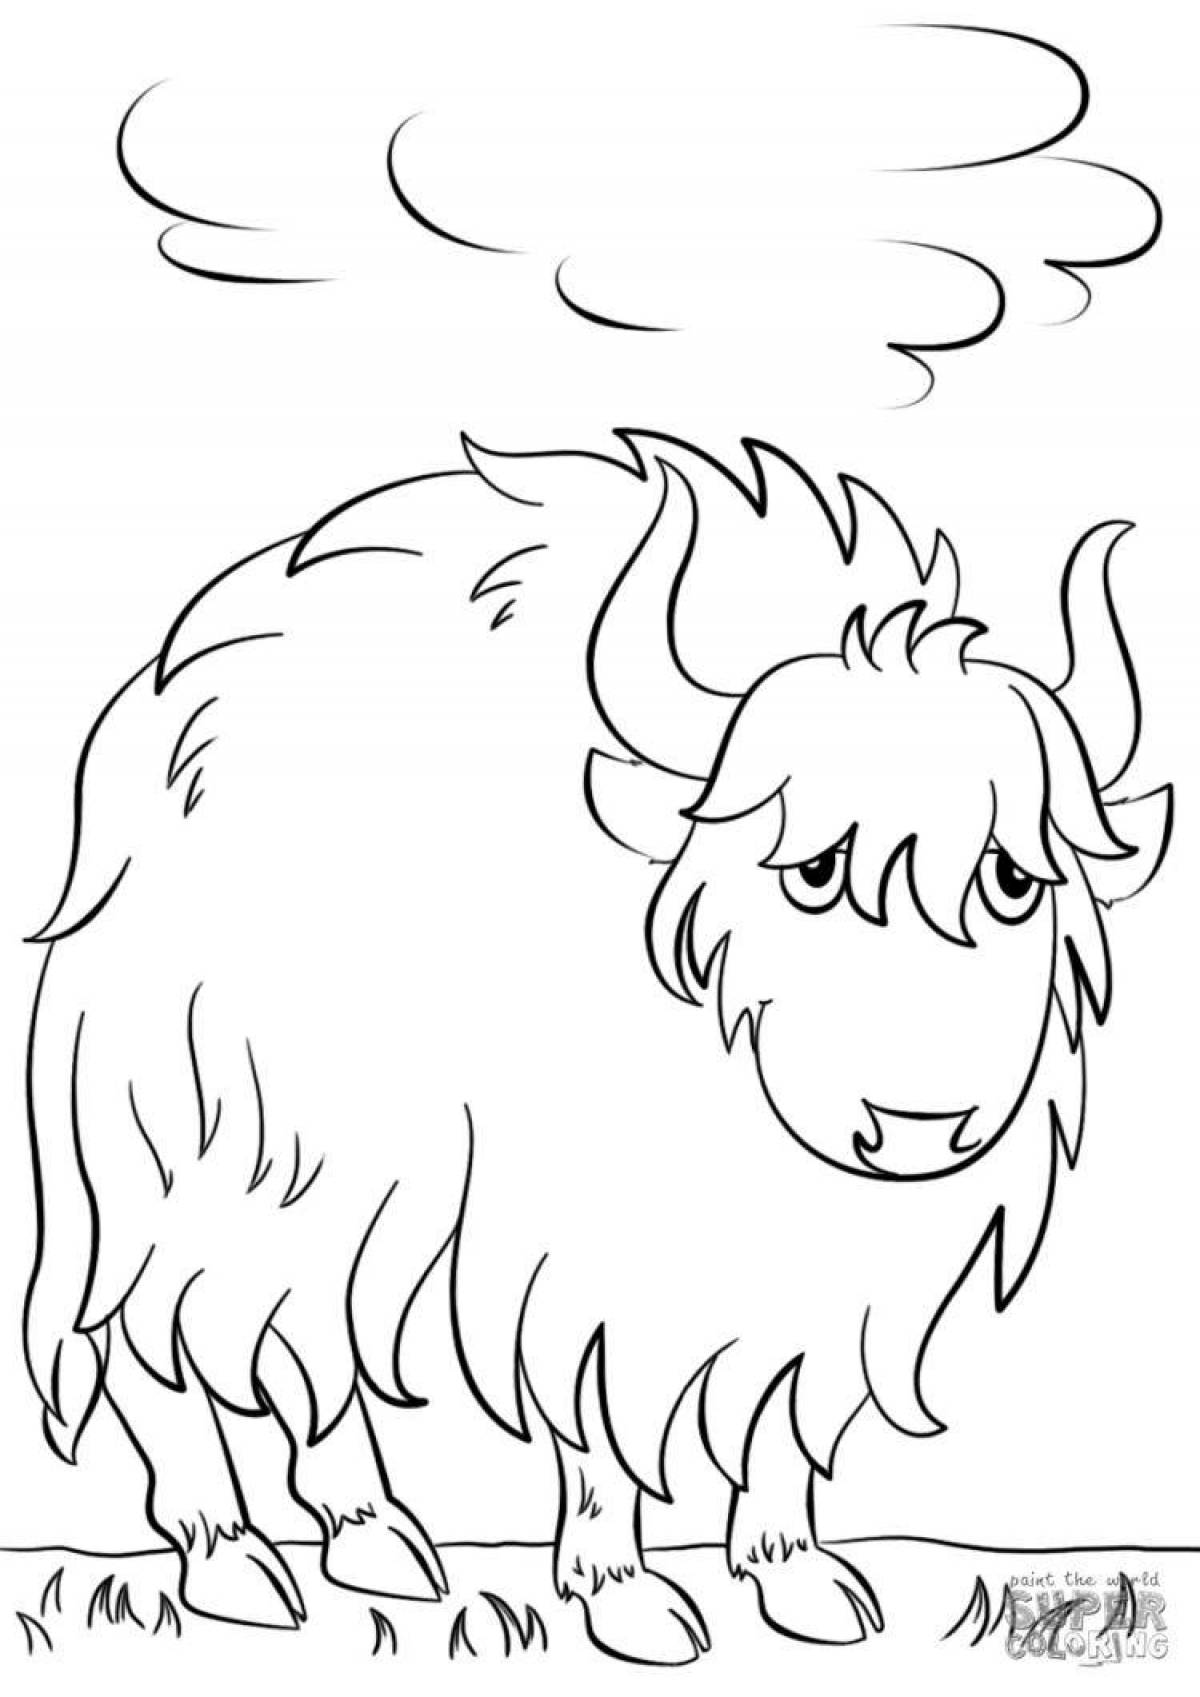 Coloring book gorgeous yak